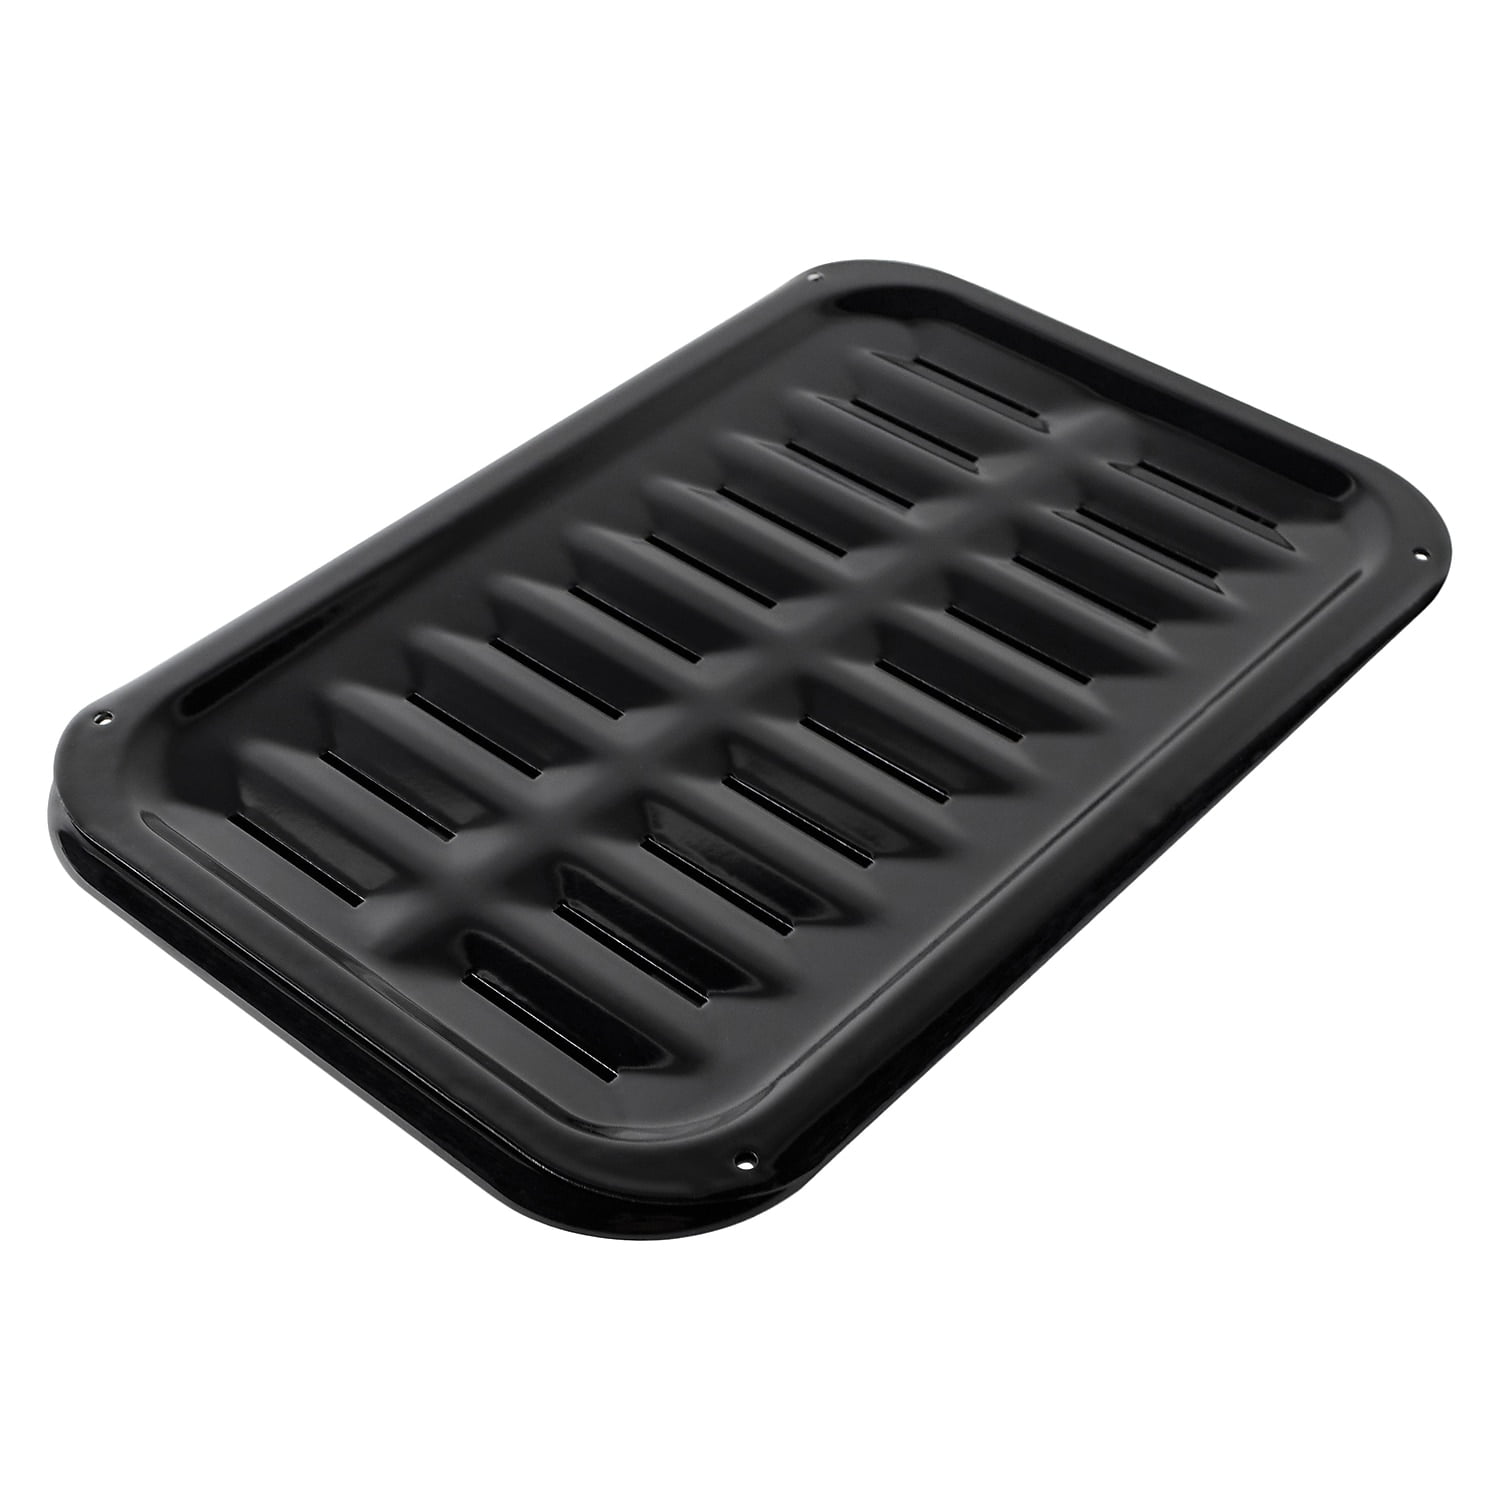 Broiler Pan for Oven/Grill 9 x 13 - Duluth Kitchen Co